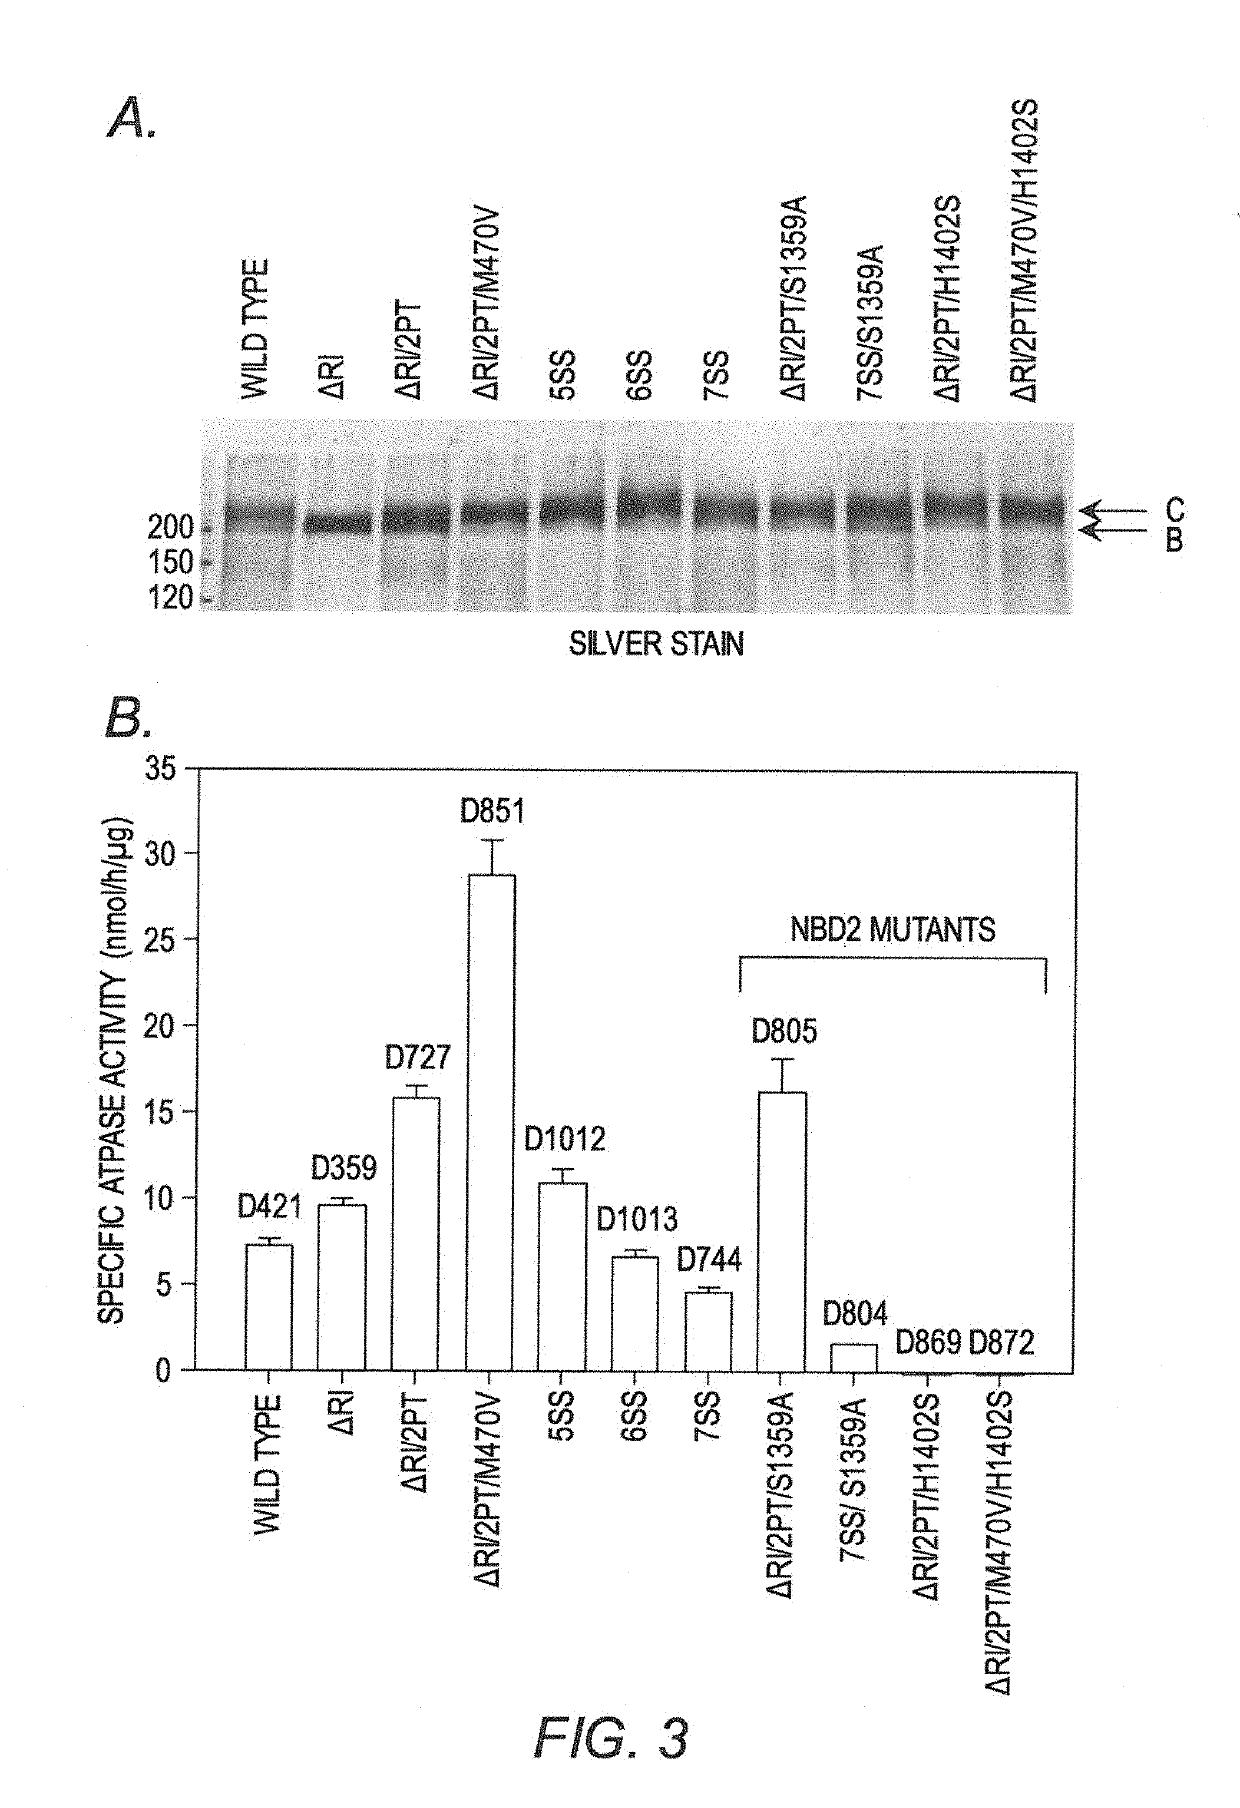 Modified cystic fibrosis transmembrane conductance regulator (CFTR) polypeptides with increased stability and uses thereof